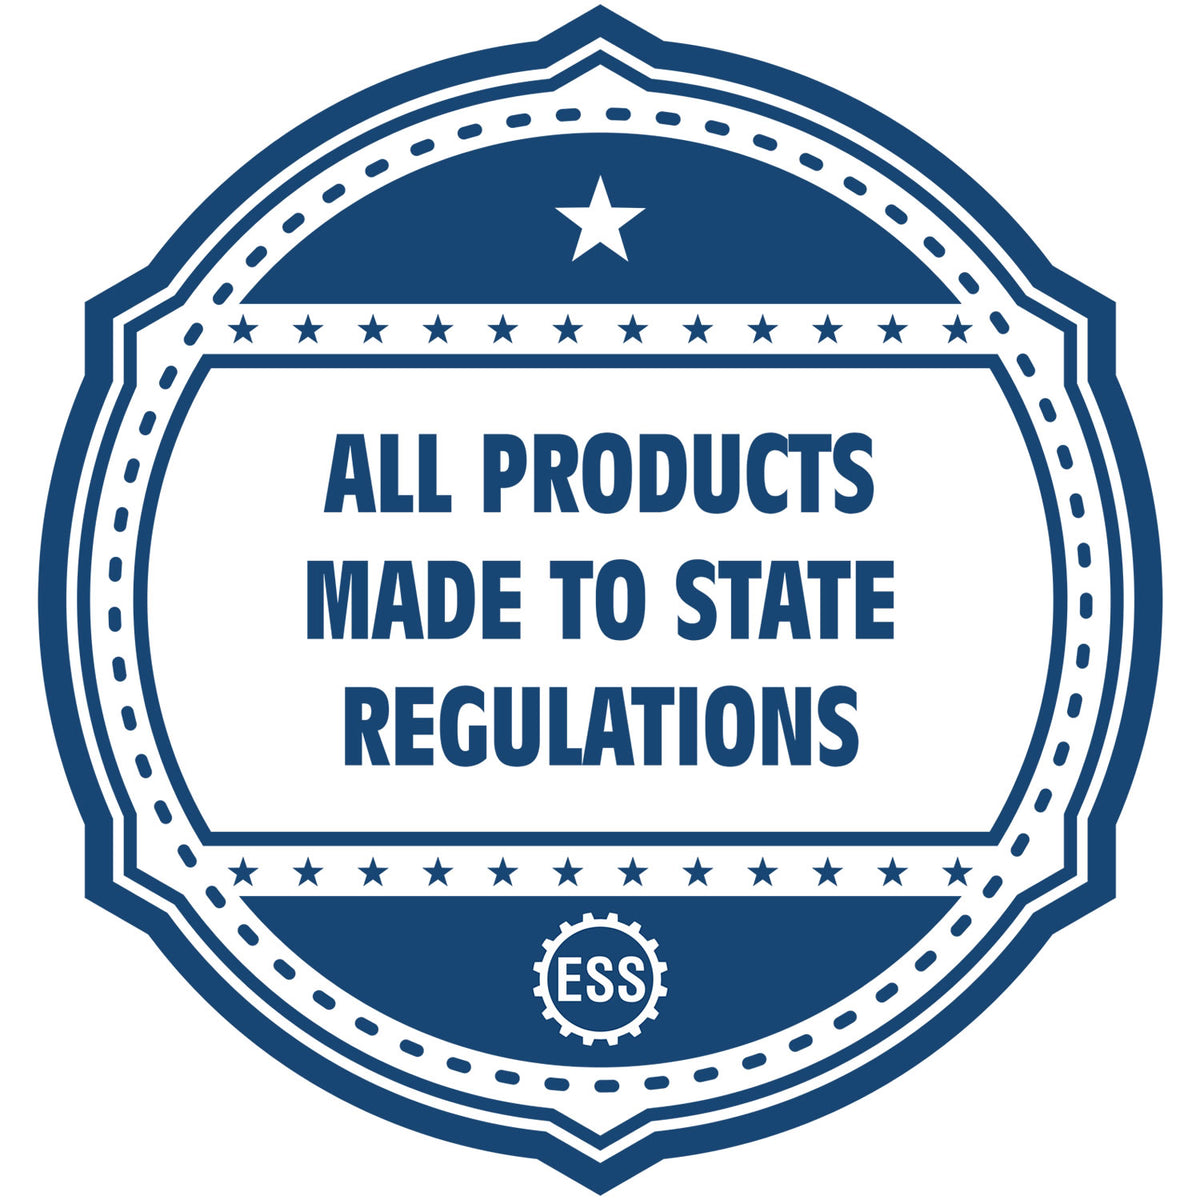 A blue icon or badge for the Slim Pre-Inked Oklahoma Professional Geologist Seal Stamp showing that this product is made in compliance with state regulations.